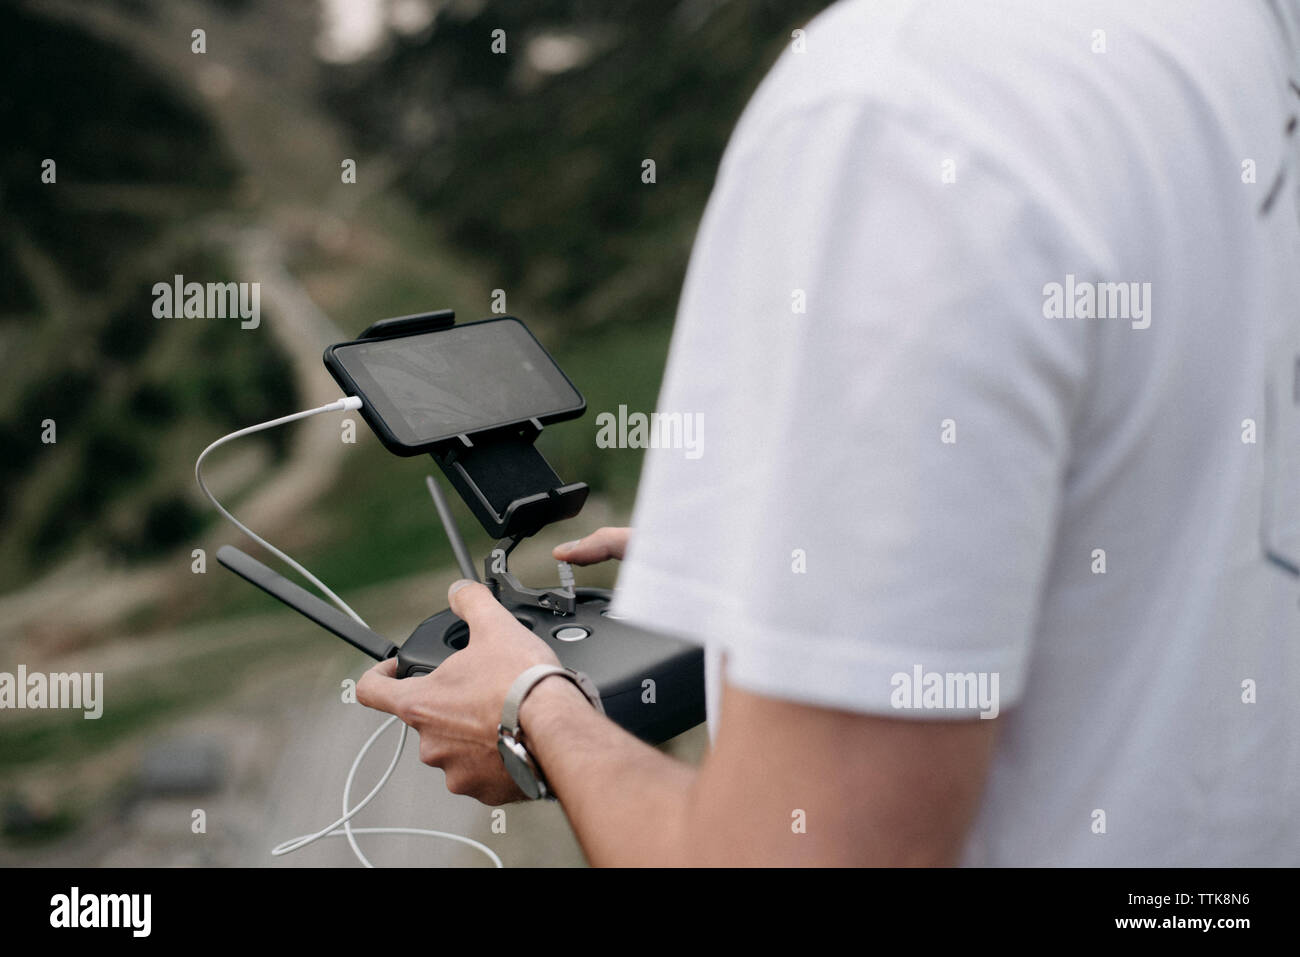 Midsection of man using mobile phone with remote control while standing outdoors Stock Photo